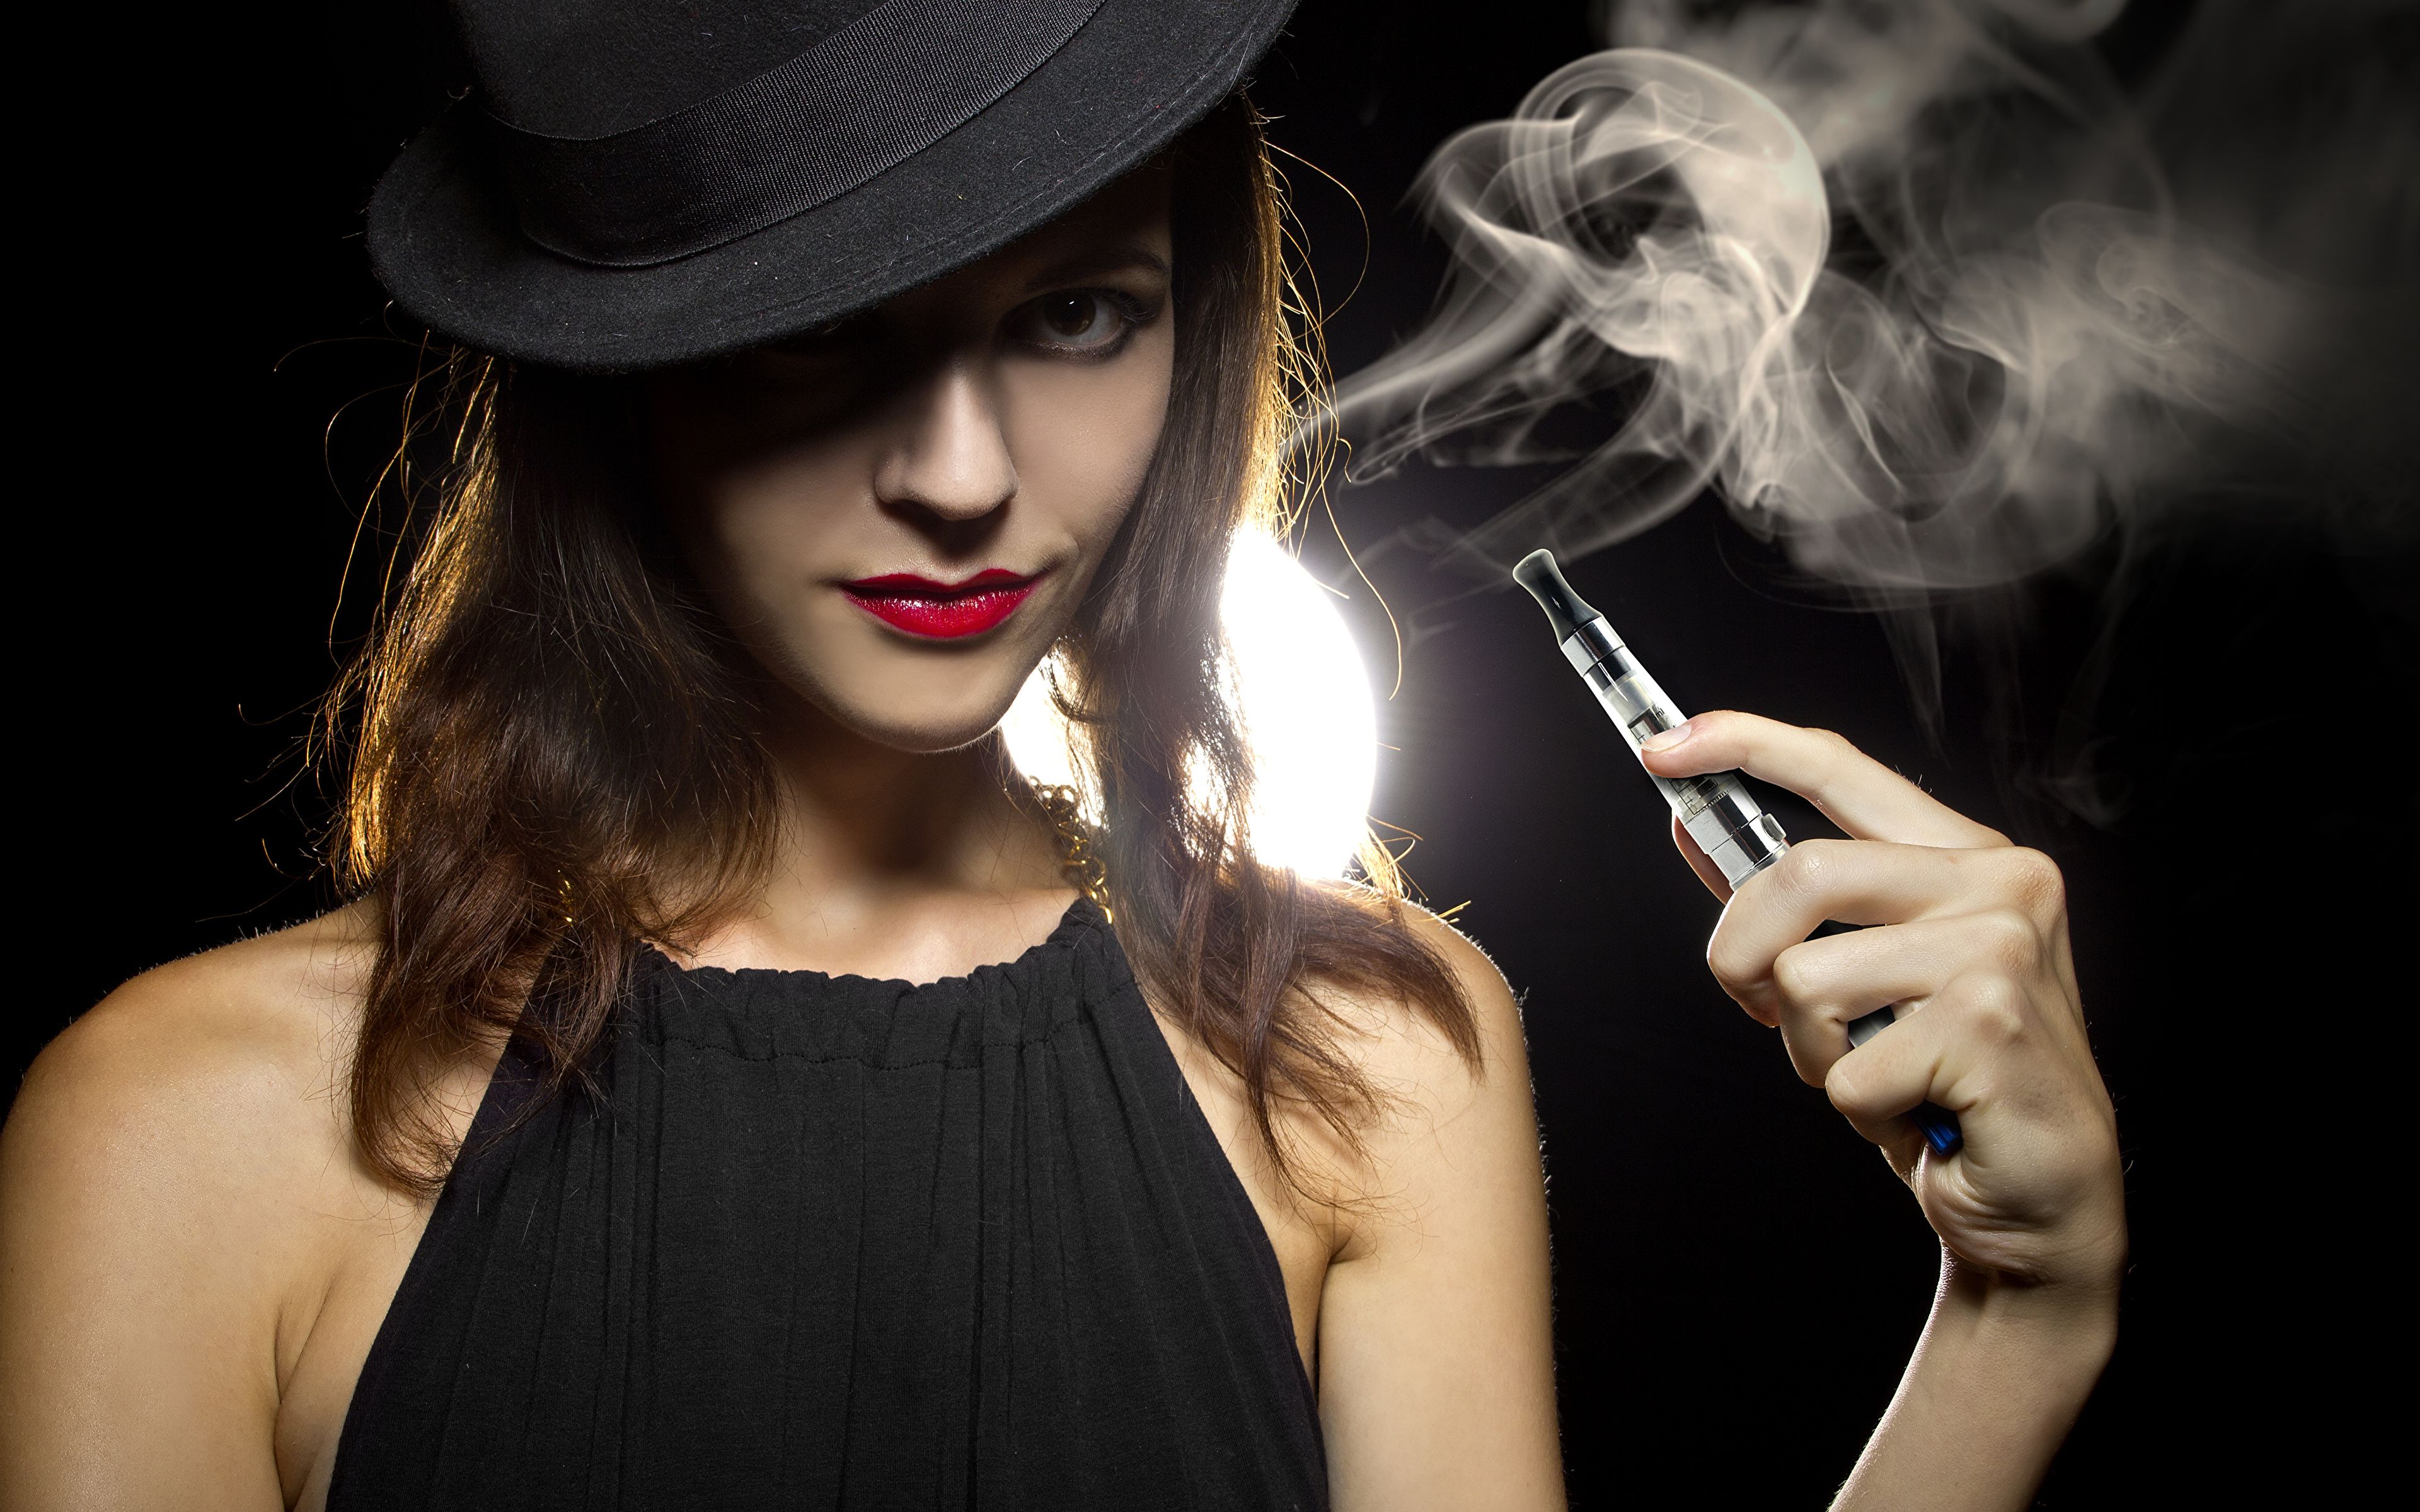 Image Brown haired Electronic cigarette vaping Hat young 3840x2400